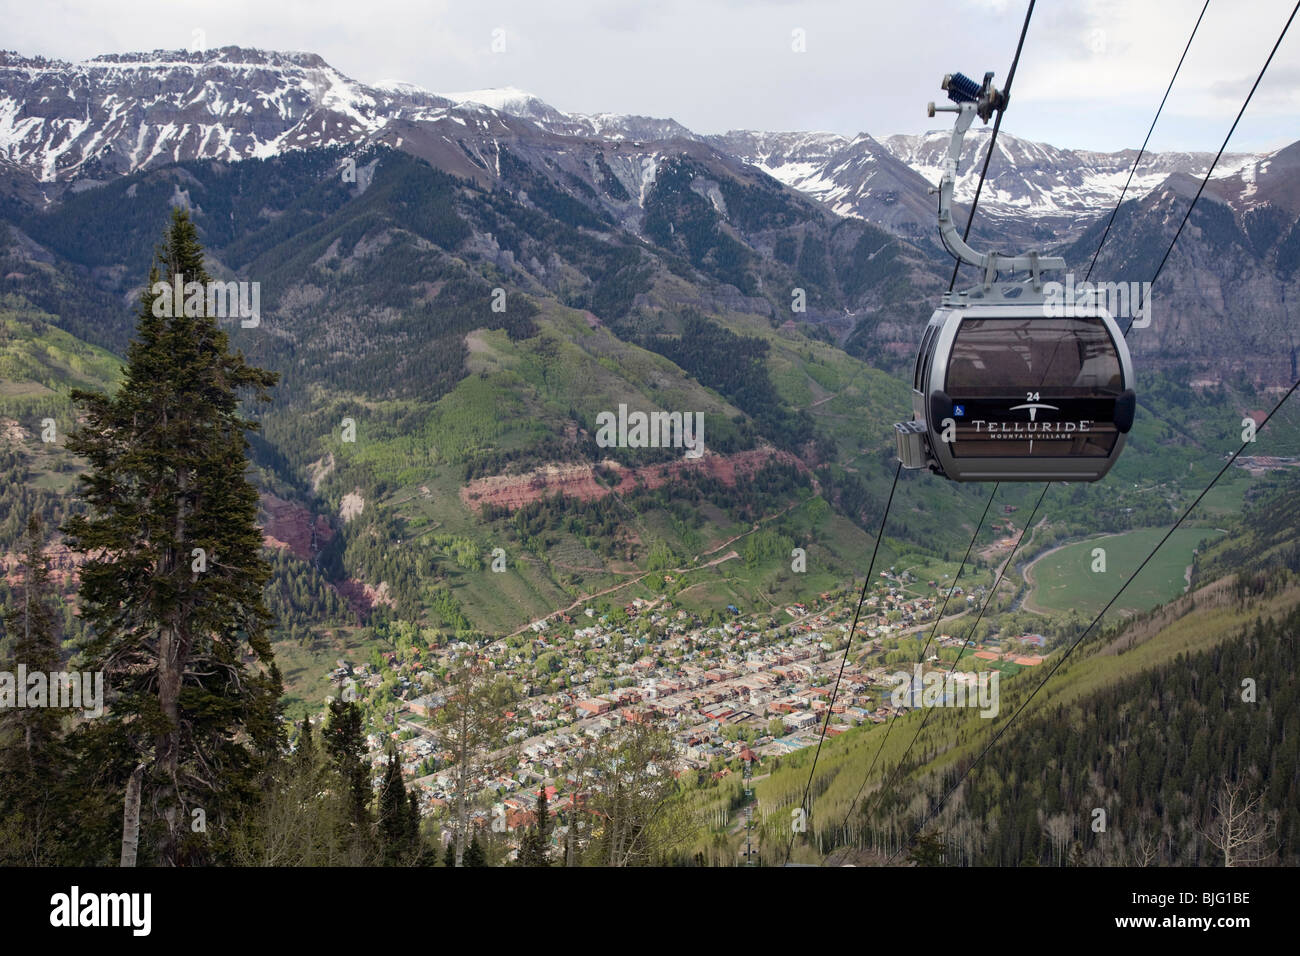 The Gondola rises from Telluride which sits in a box canyon in southwestern Colorado. Stock Photo